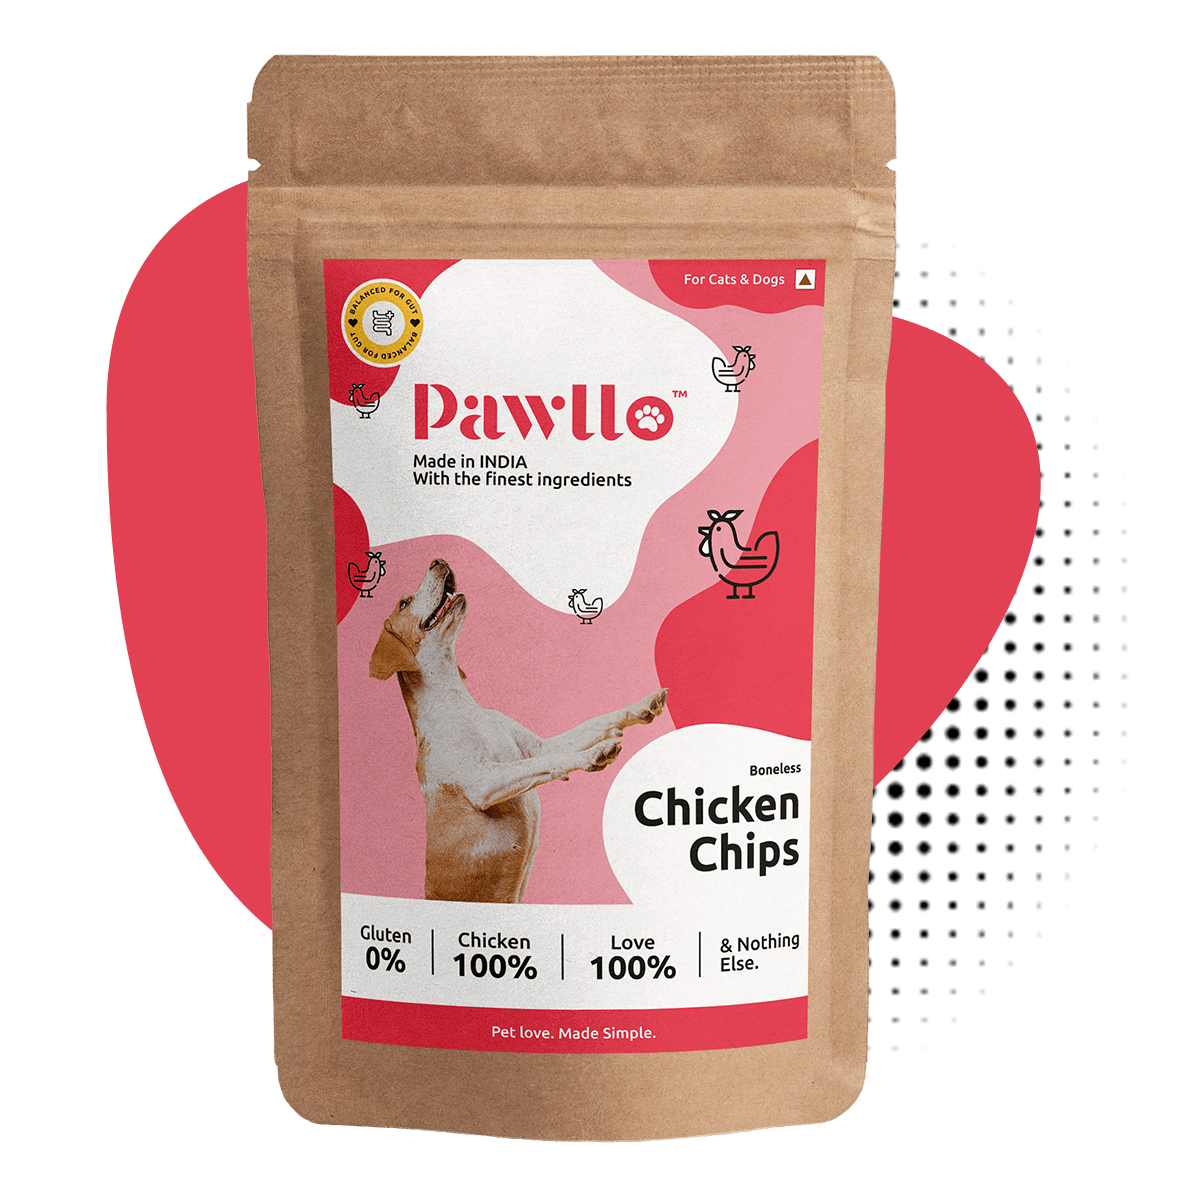 Chicken Chips - Boneless Dehydrated Natural Protein Loaded Snack for Cats and Dogs